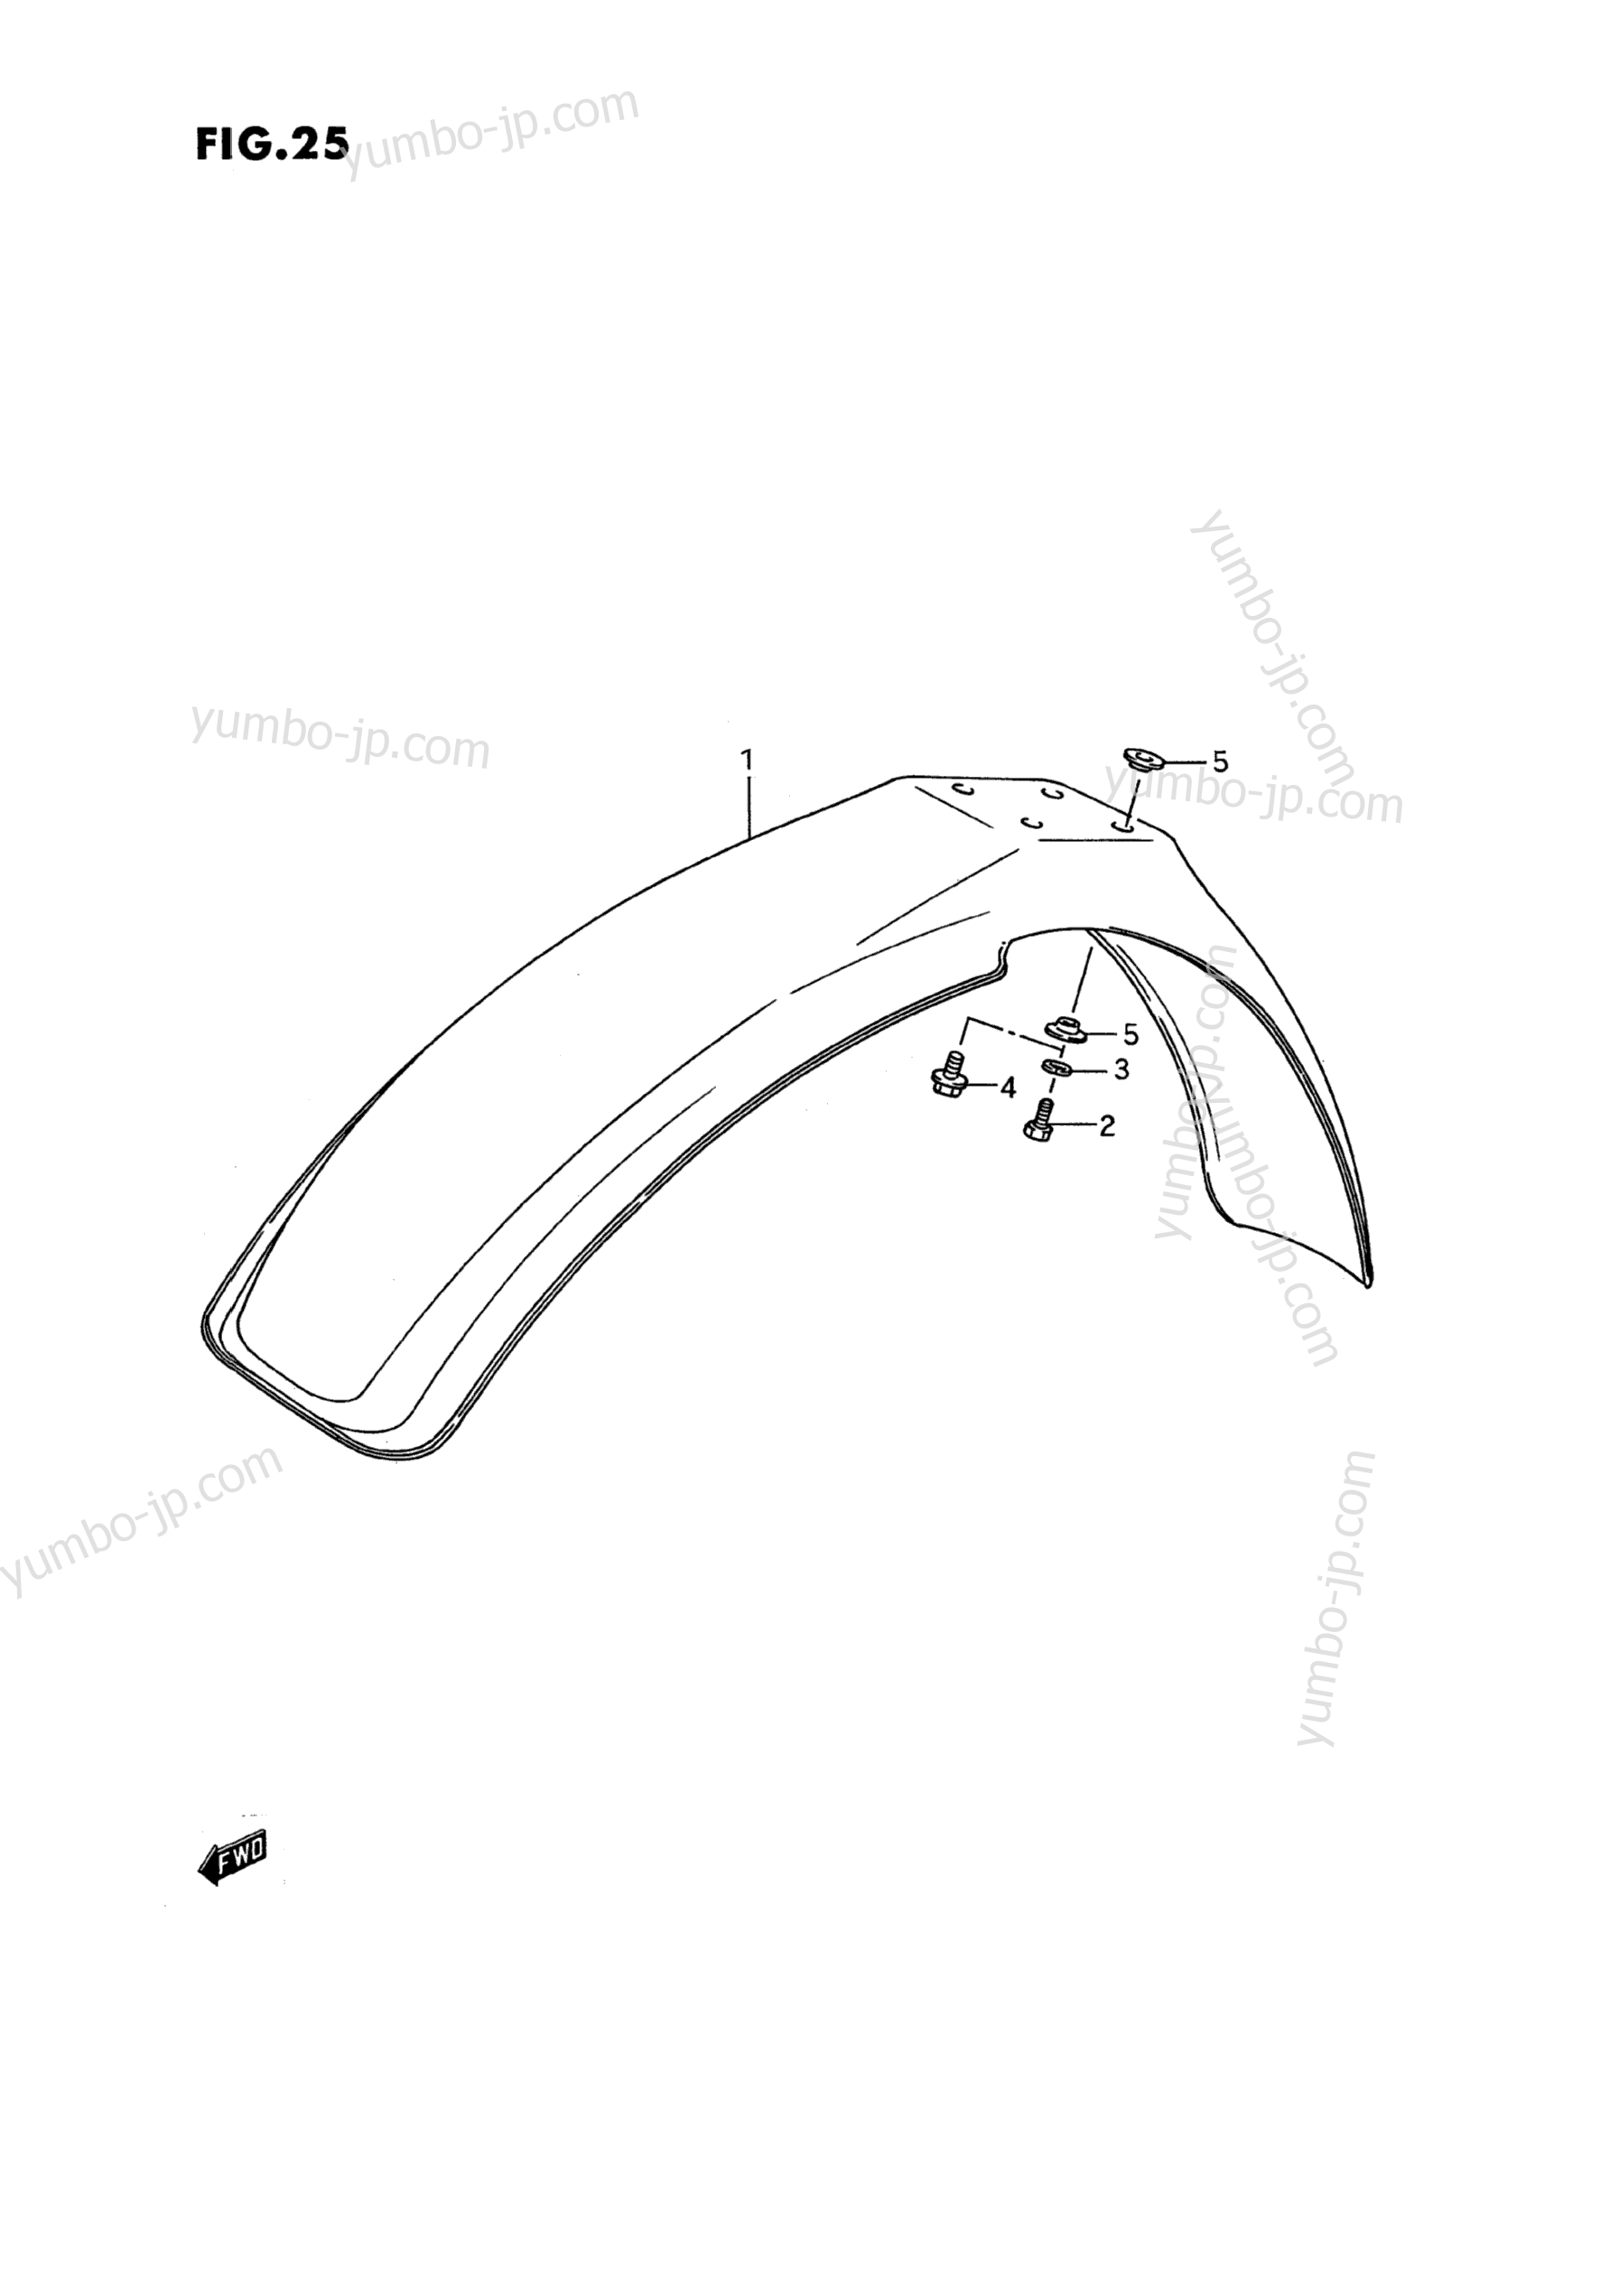 FRONT FENDER for motorcycles SUZUKI RM80 1988 year